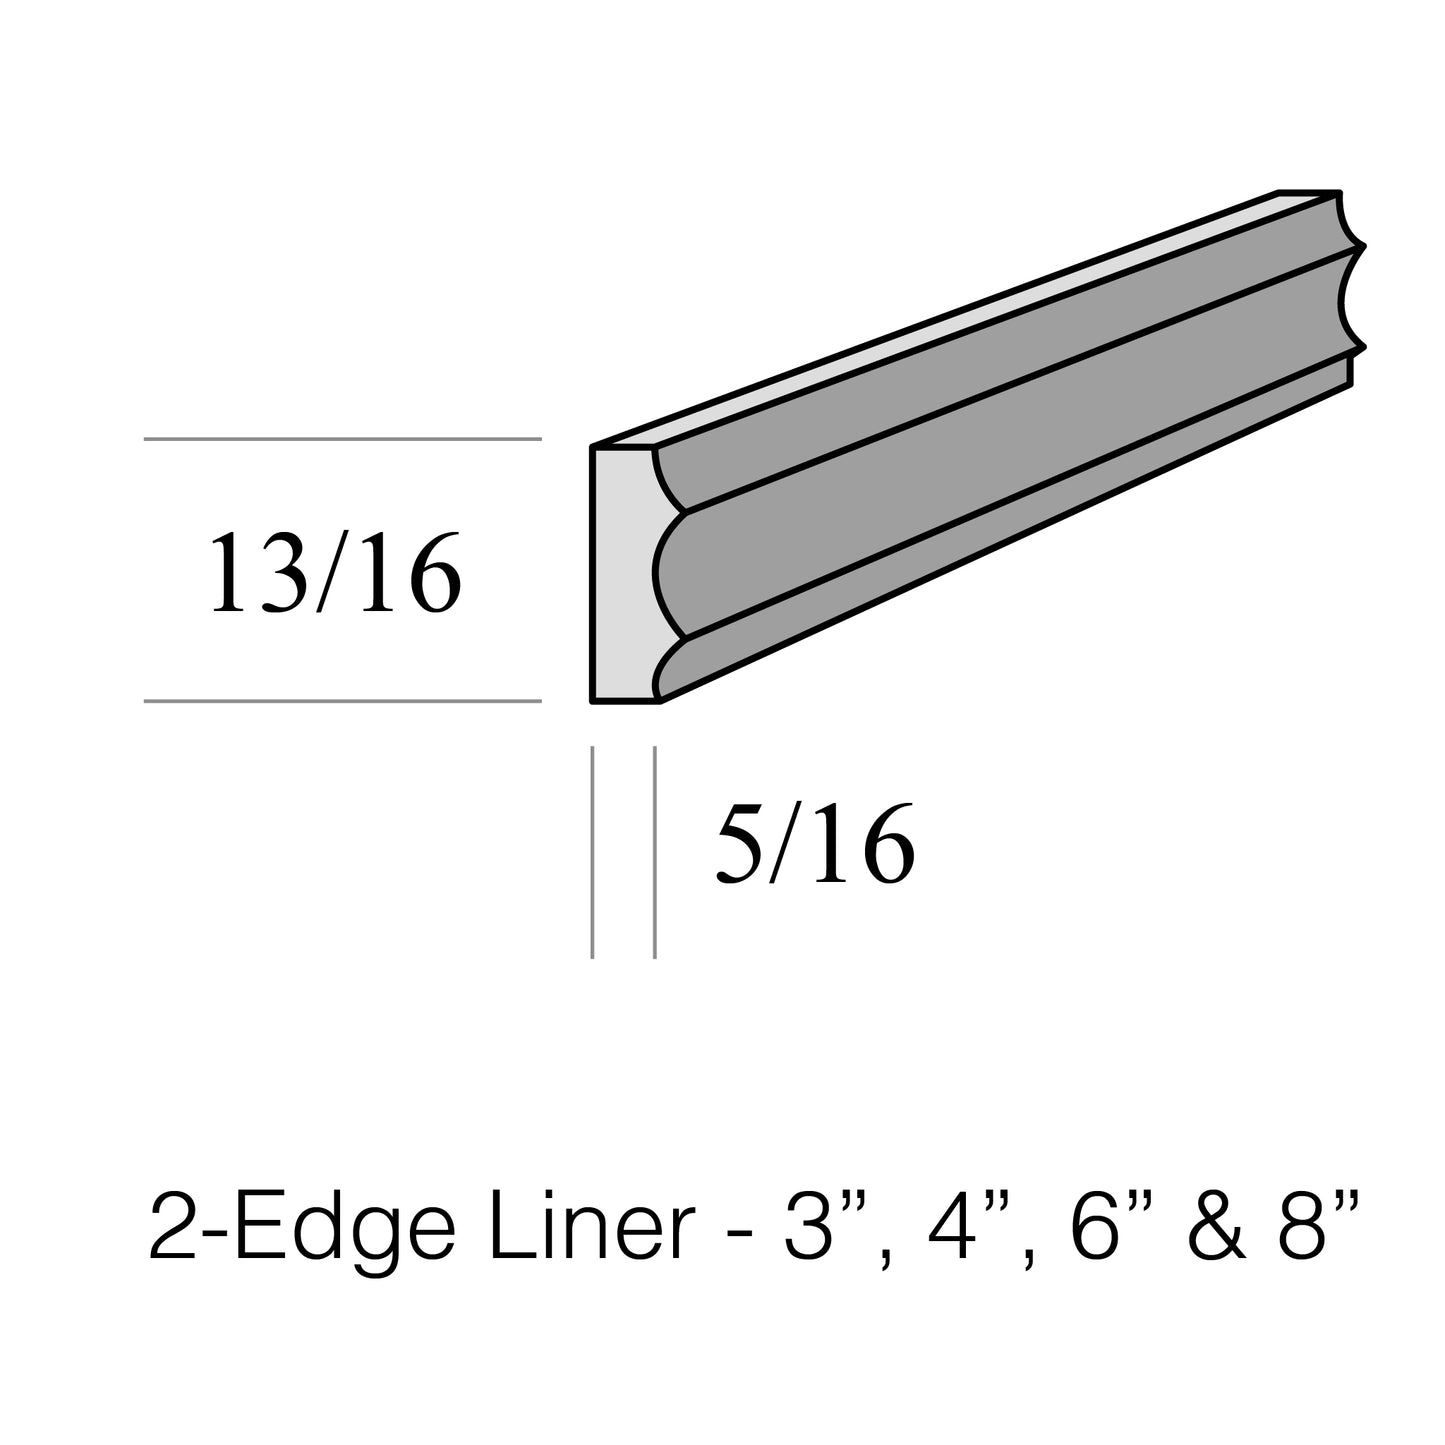 Two-Edge Liner 6"